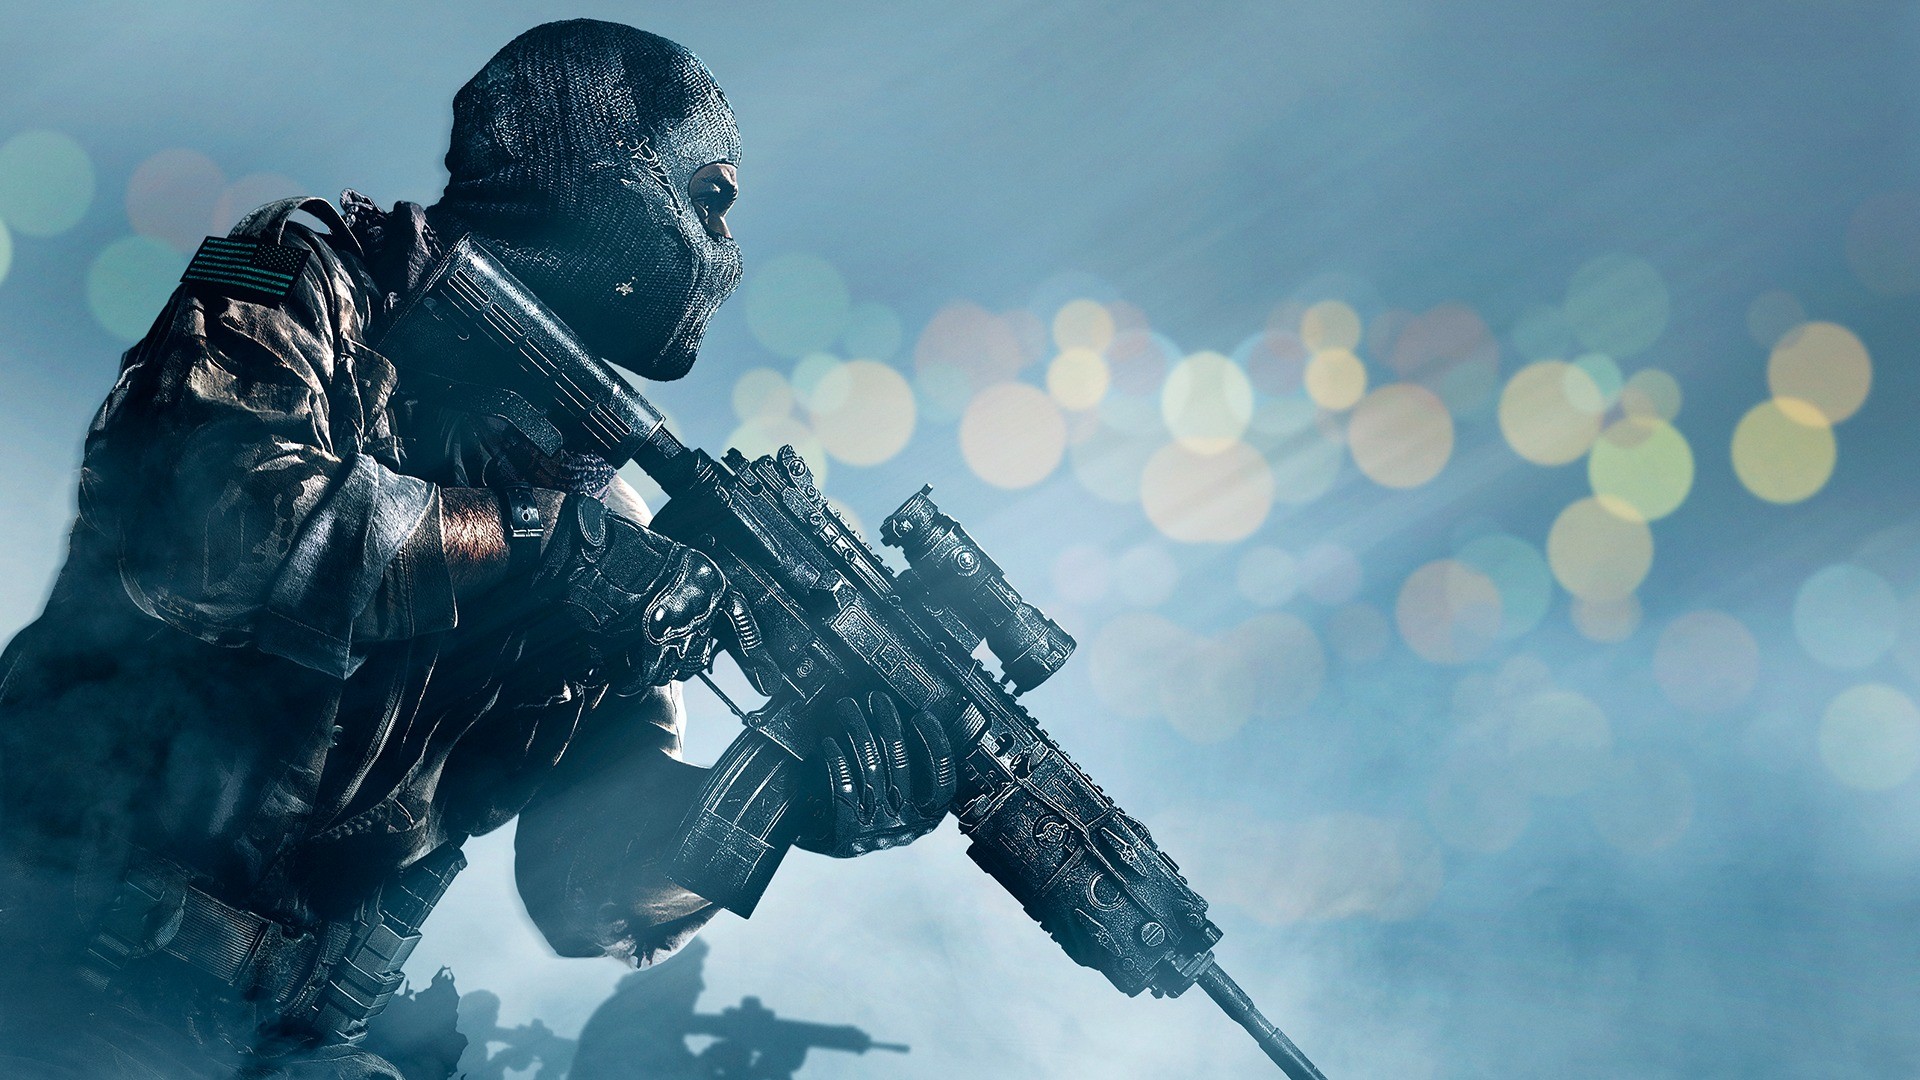 1920x1080  Wallpaper call of duty ghosts, activision, infinity ward,  soldier, gun,